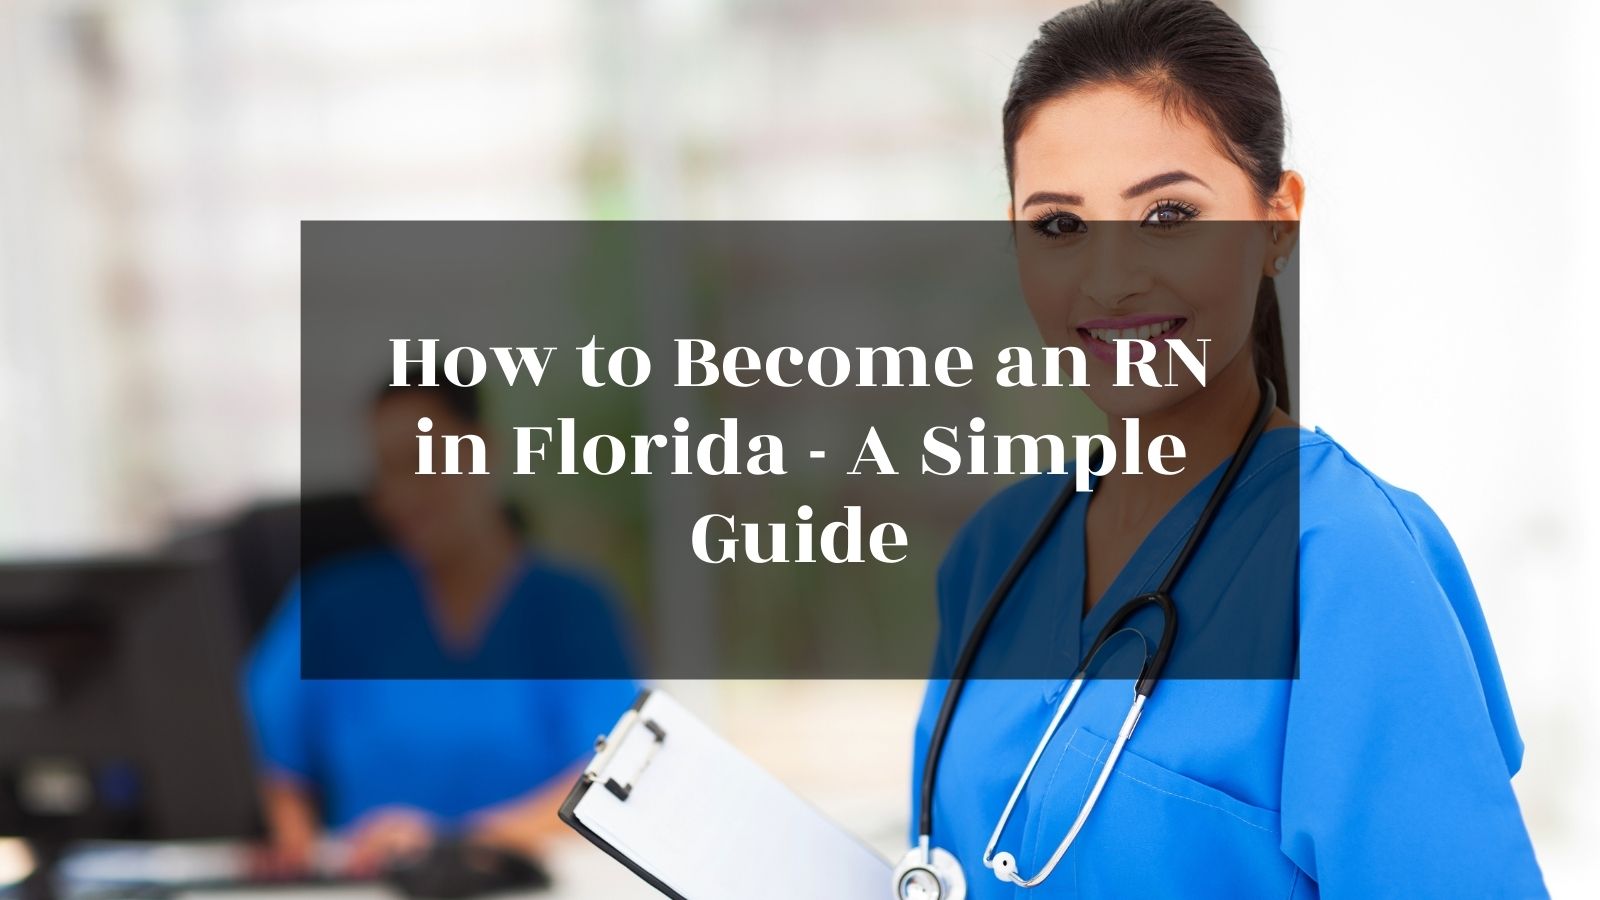 How to Become an RN in Florida - A Simple Guide